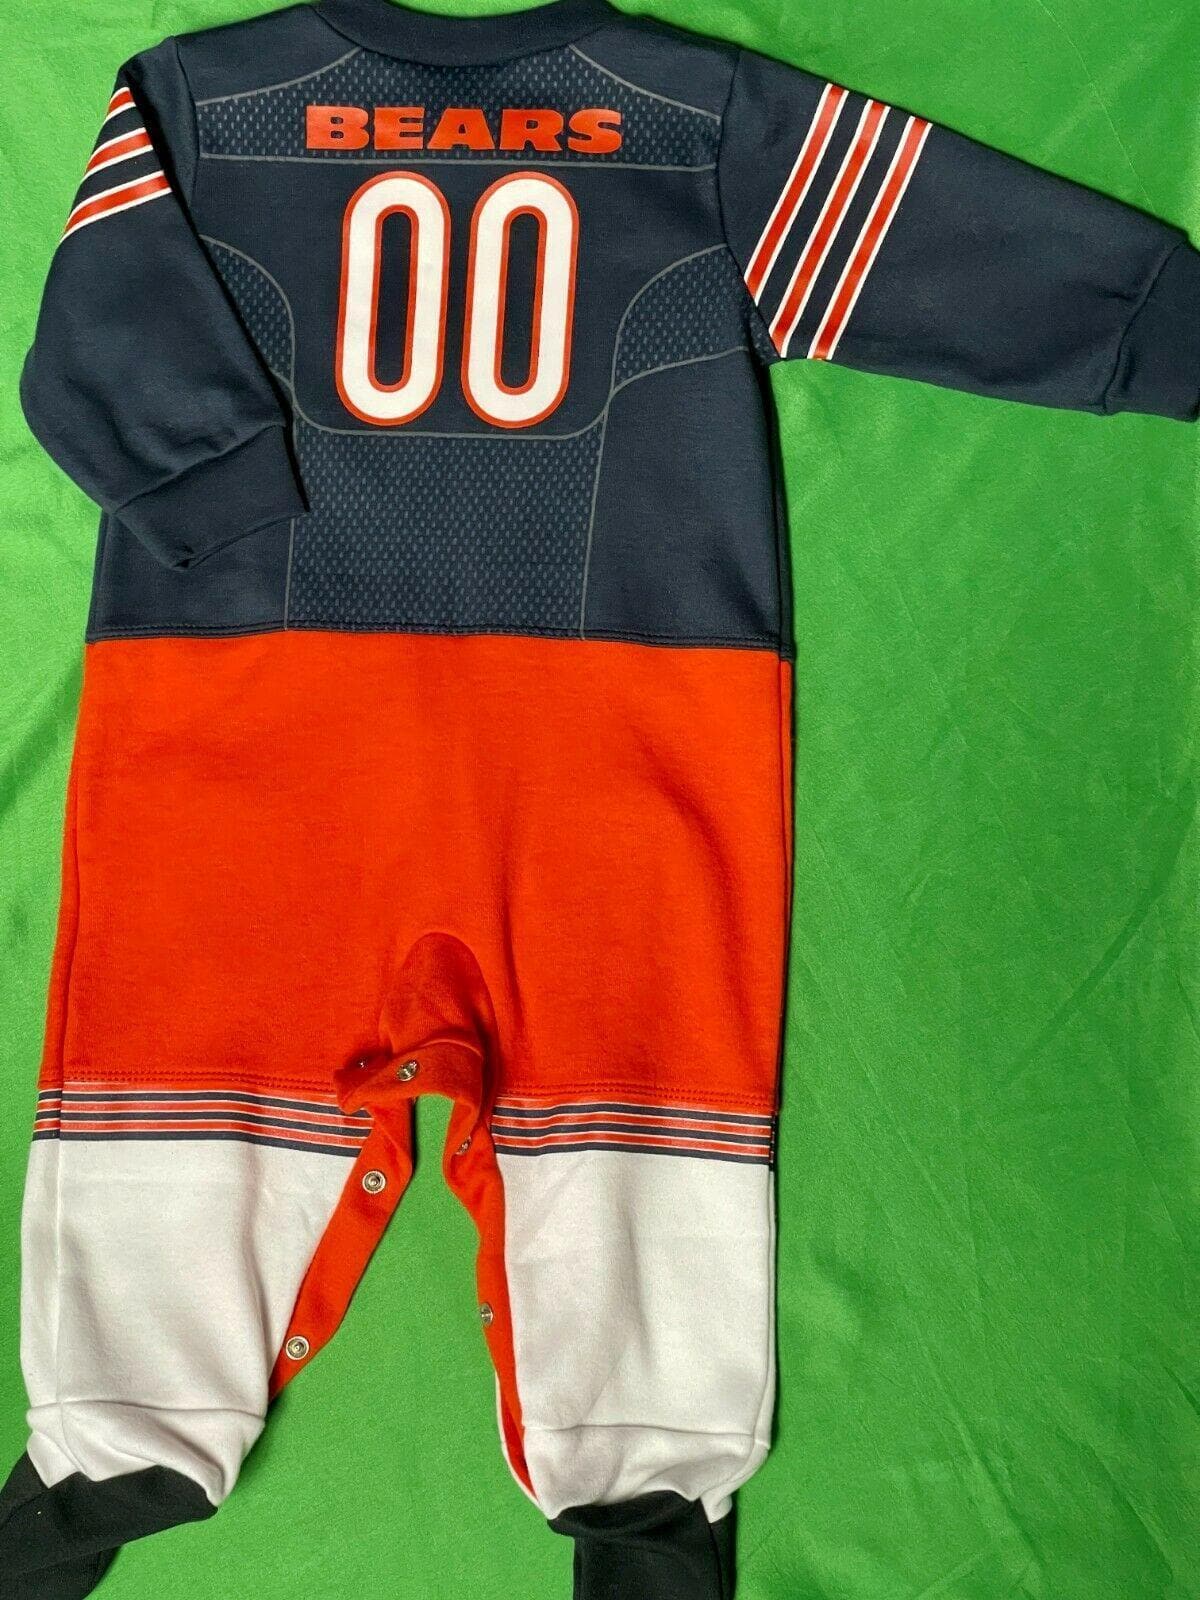 NFL Chicago Bears Infant Baby Playsuit Outfit 3-6 months